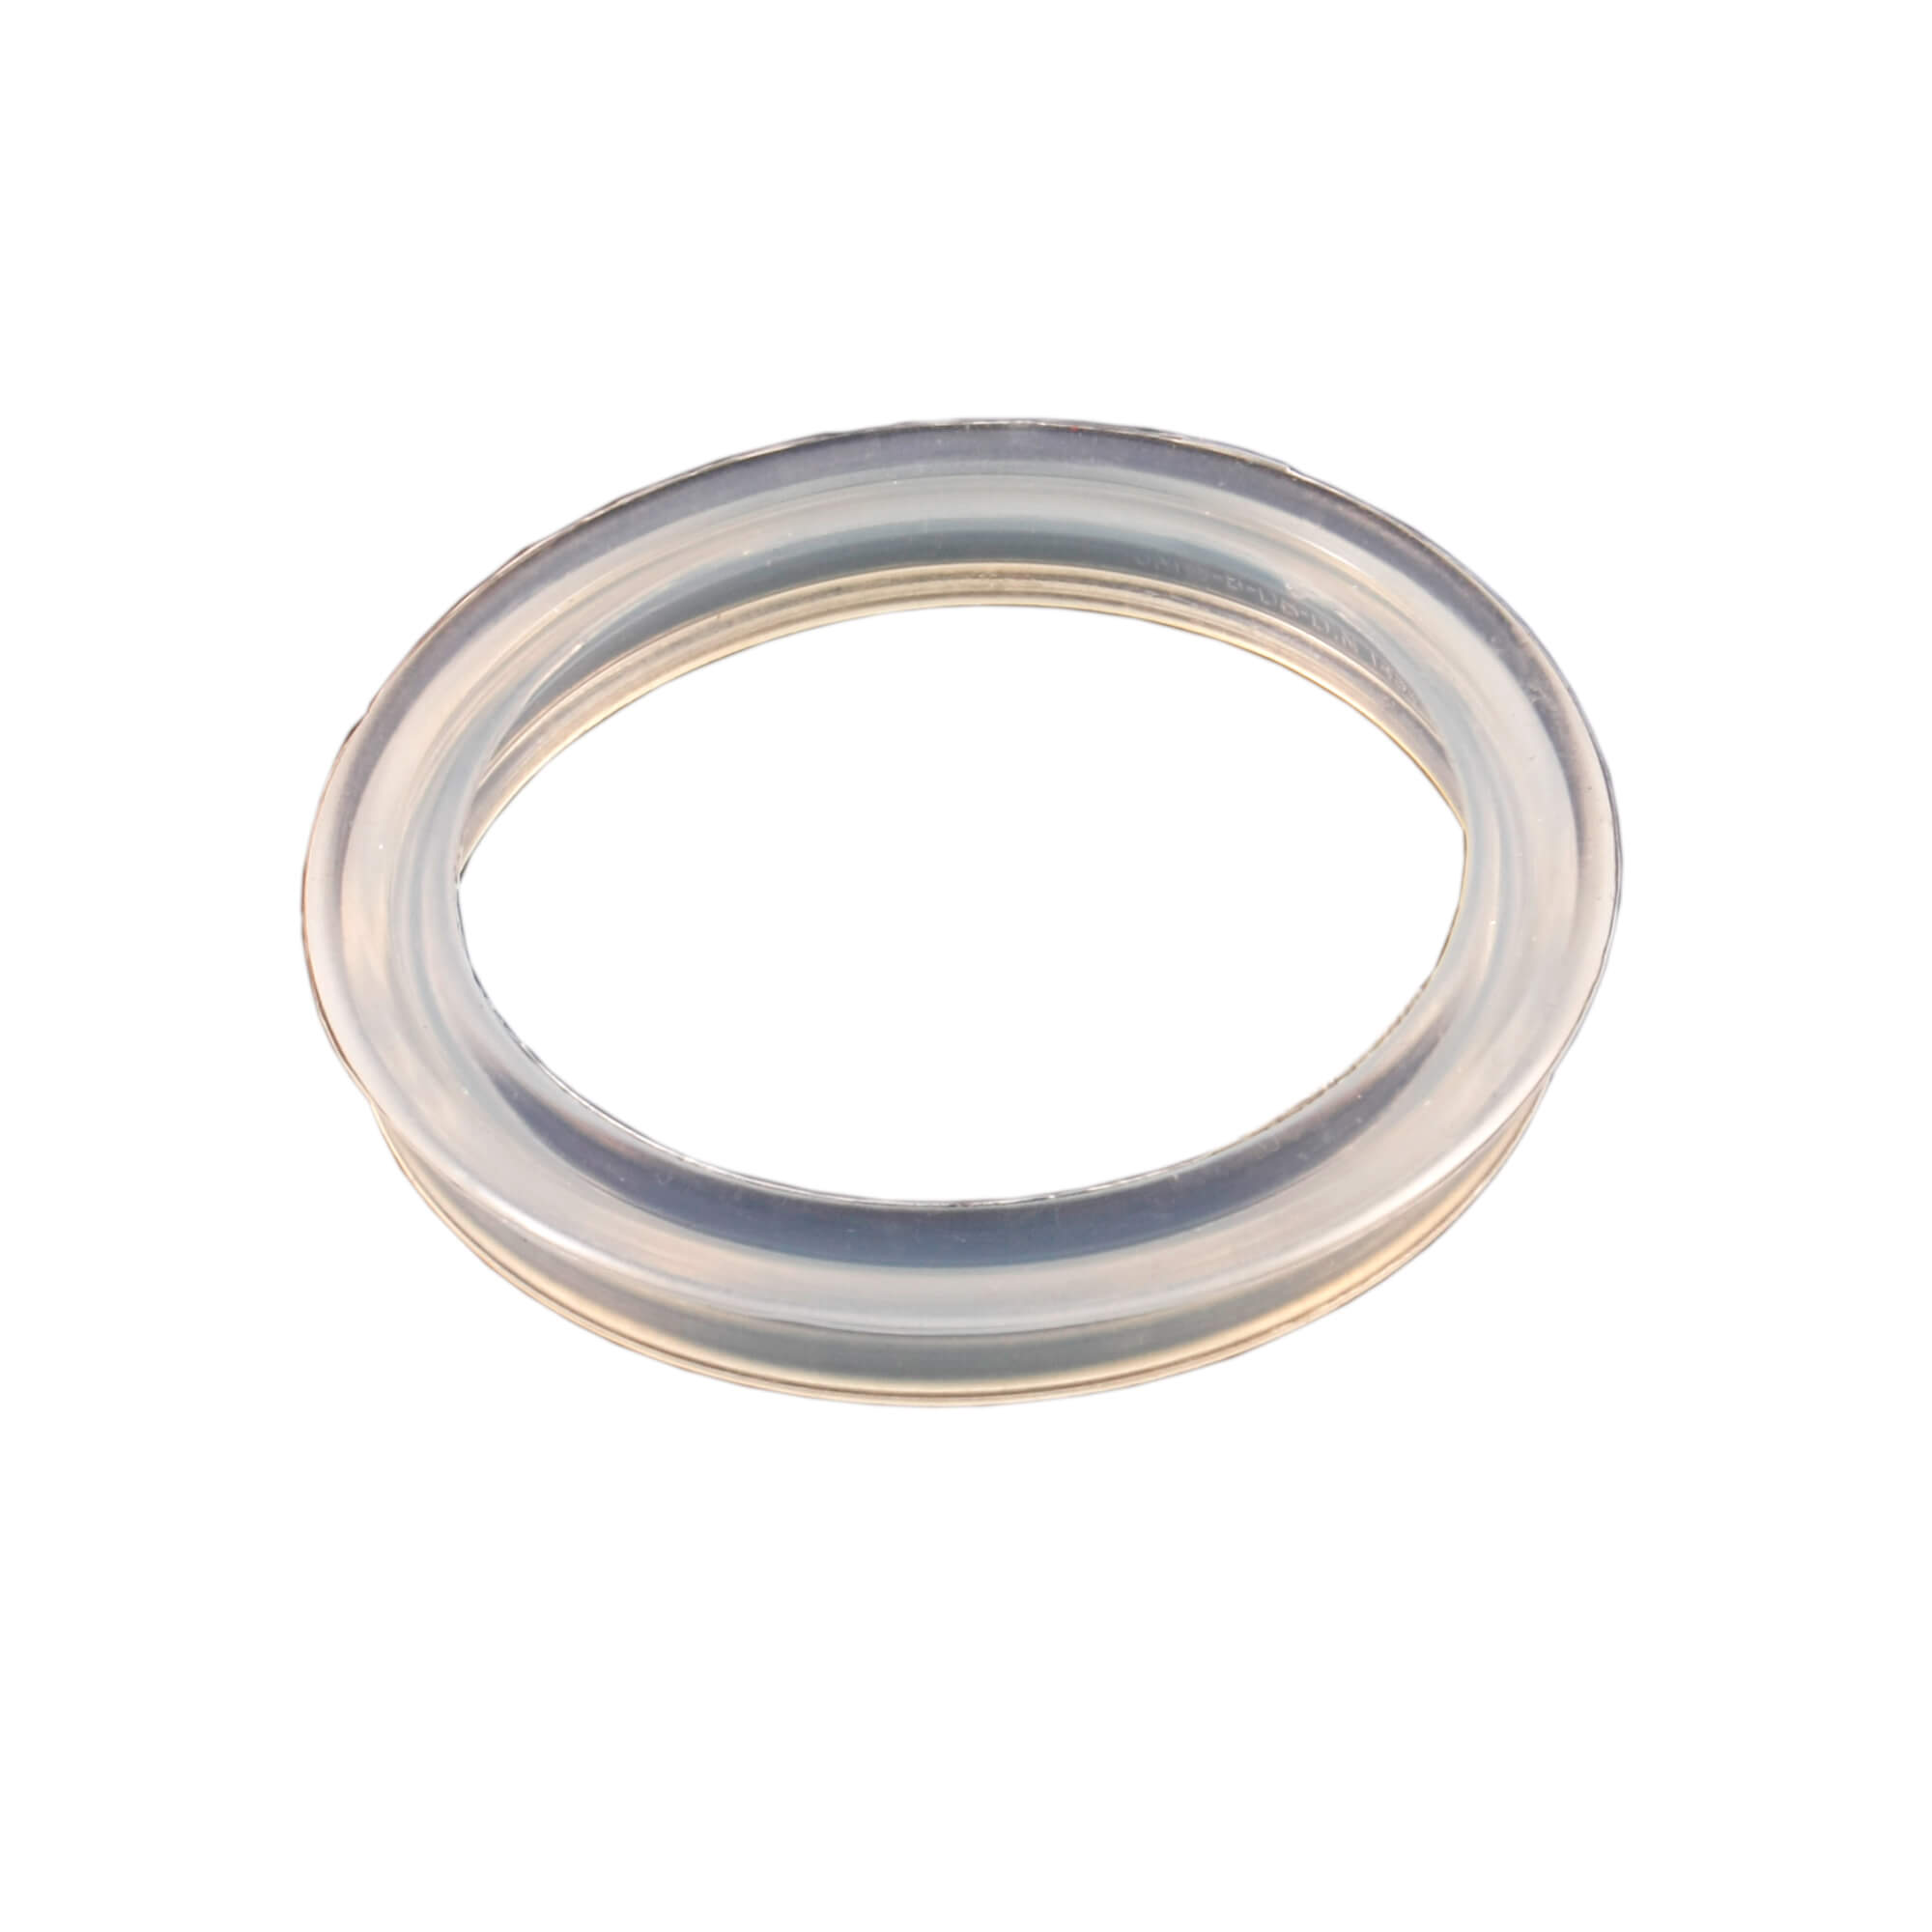 Storz Suction Gasket 110 mm, silicone